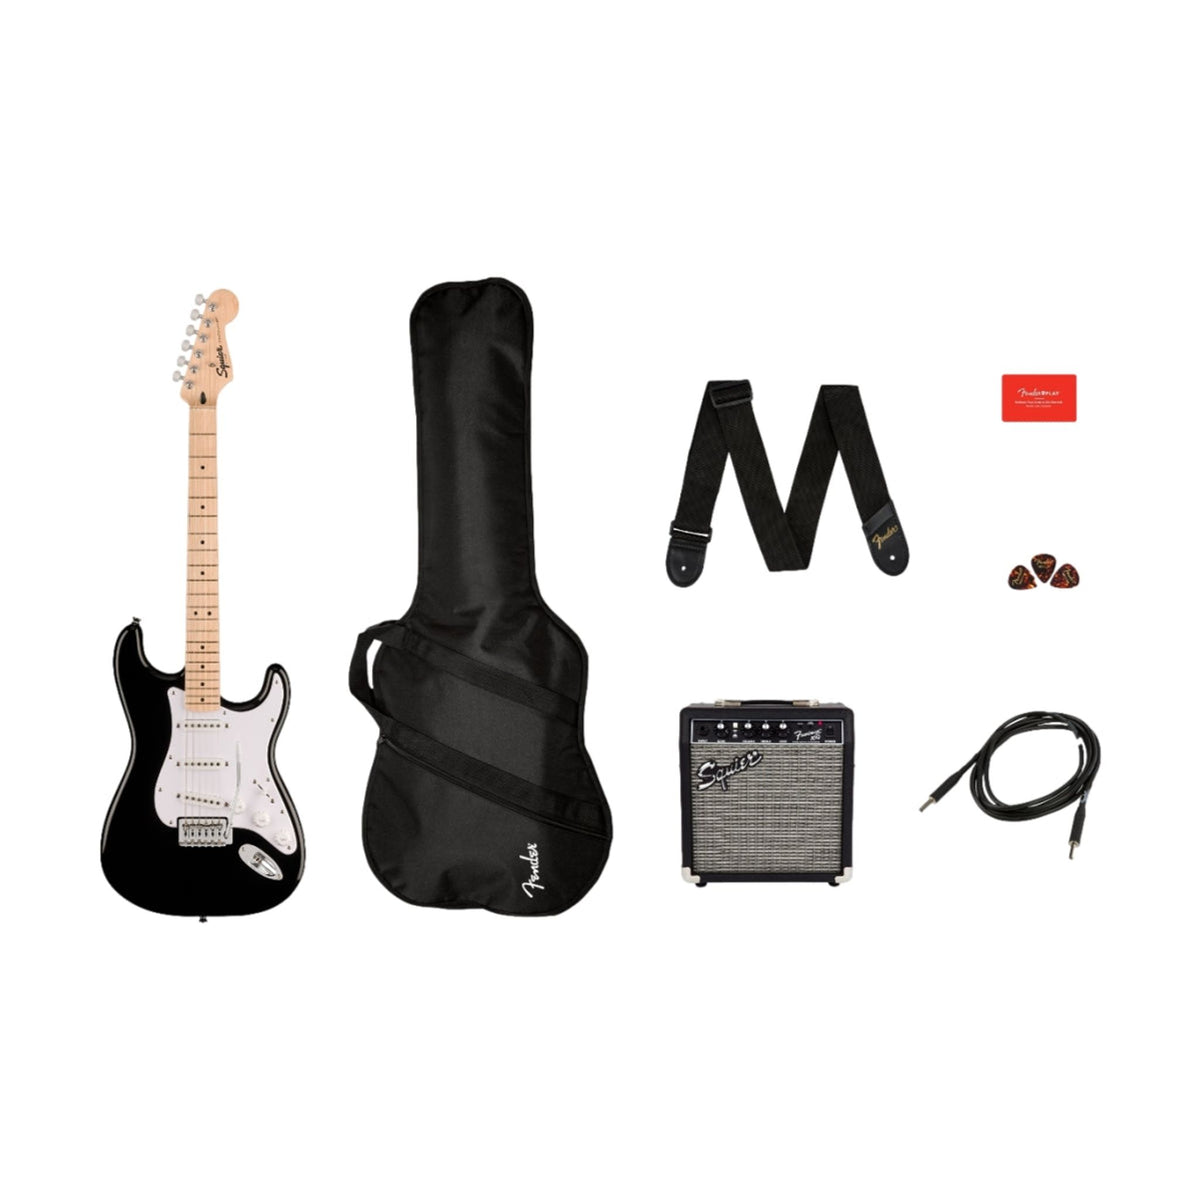 Squier Sonic Electric Guitar Black Stratocaster Pack